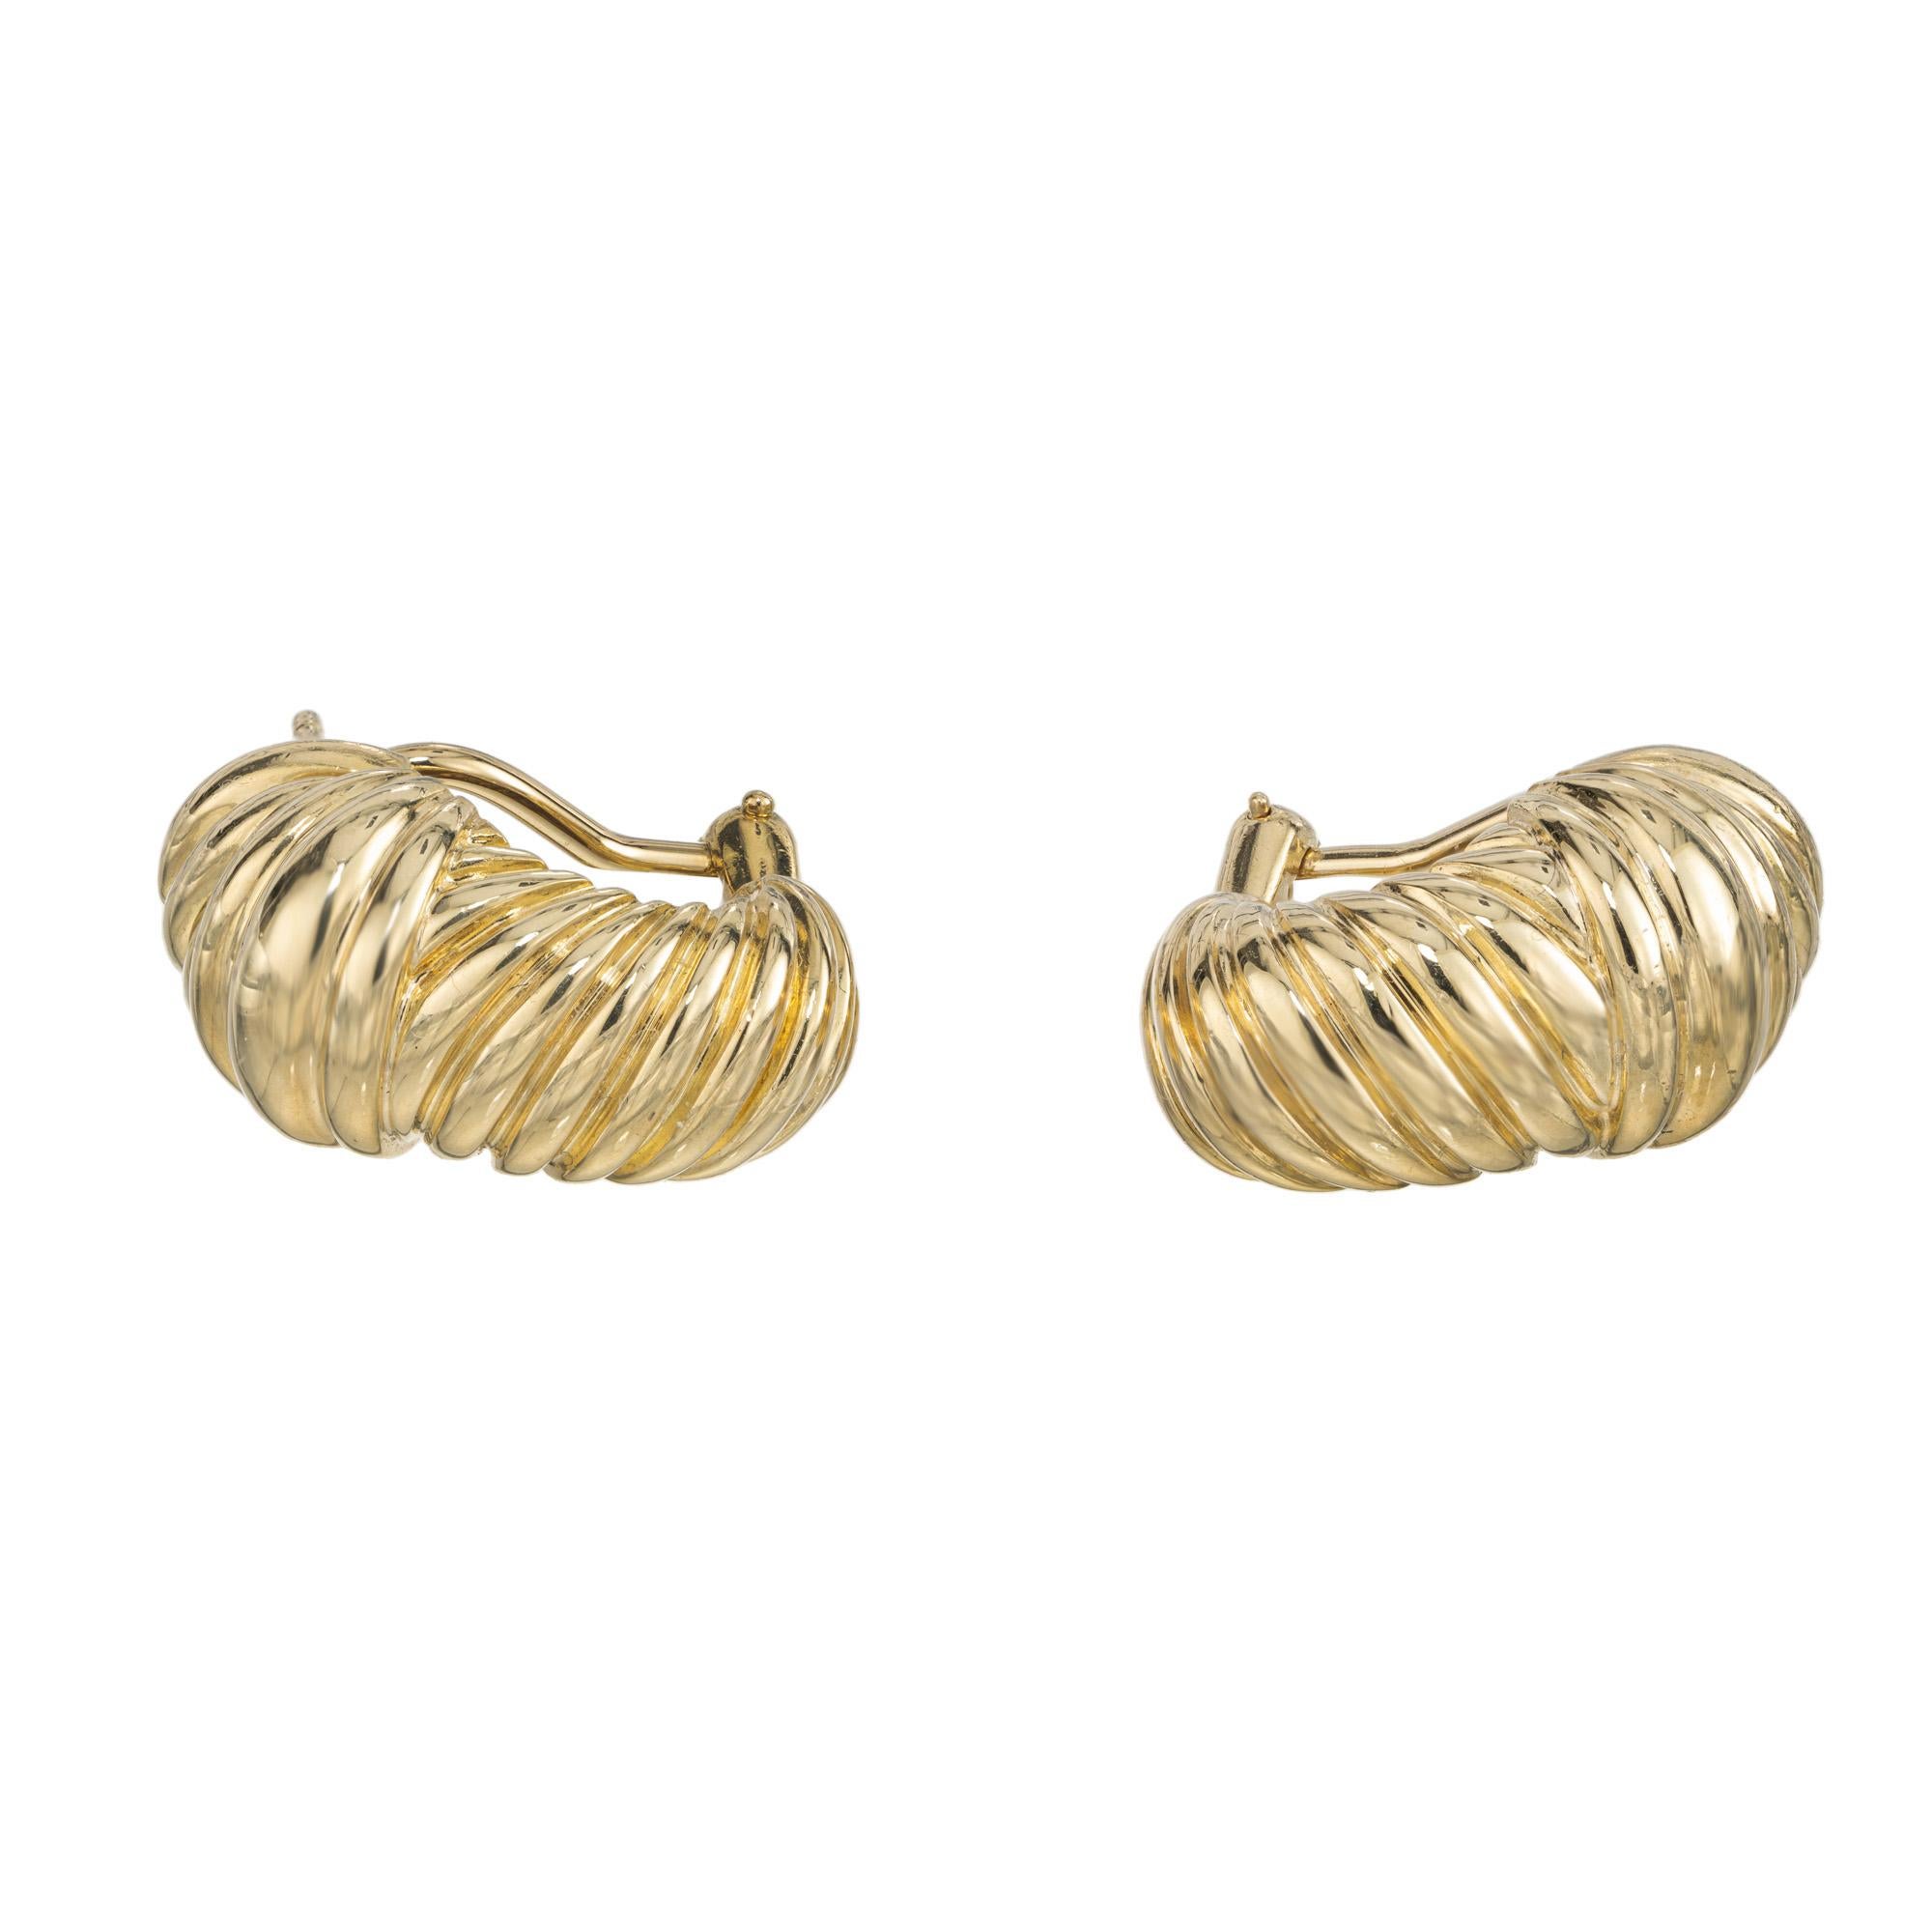 David Yurman Yellow Gold Clip Post Hoop Earrings. These earrings are crafted with elegance and timeless beauty that David Yurman is known for. Made from high-quality 18k yellow gold, these earrings have a classic clip post design that ensures a